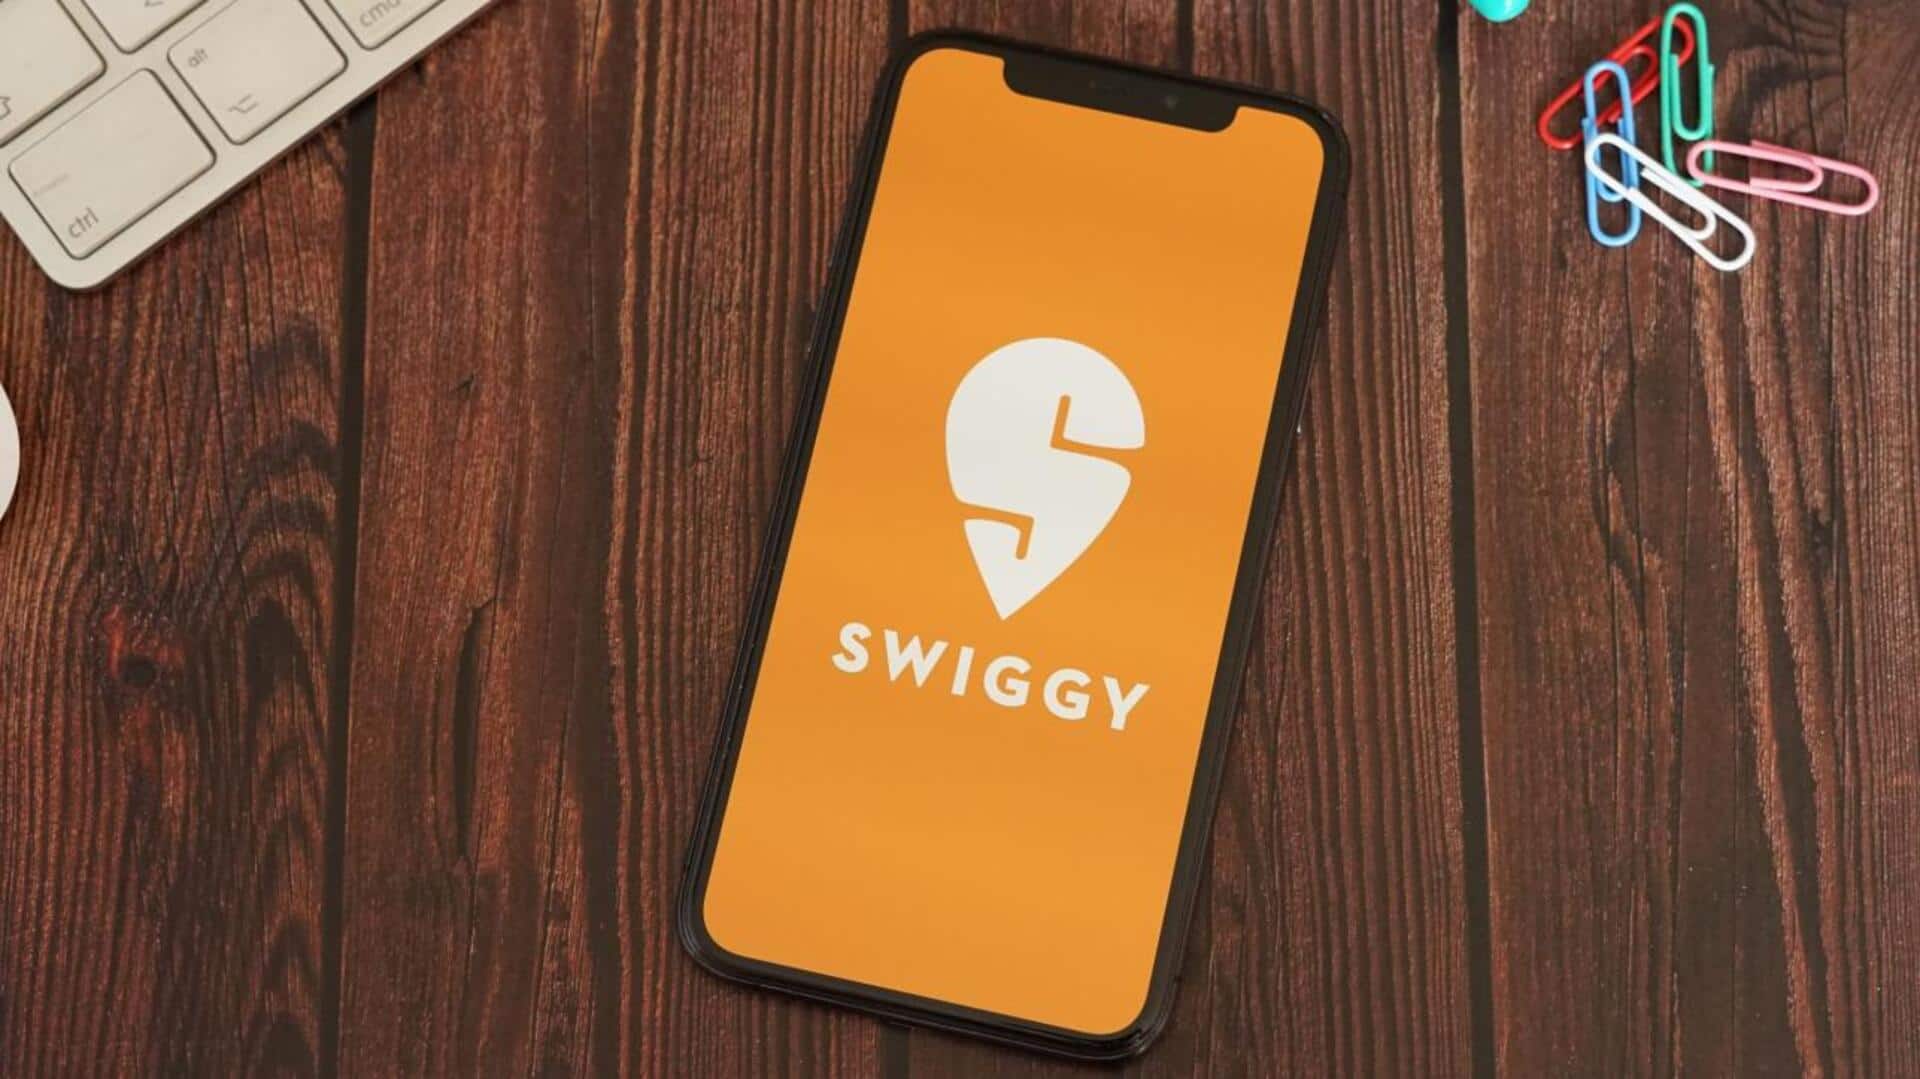 IPO-bound Swiggy to lay off 400 workers